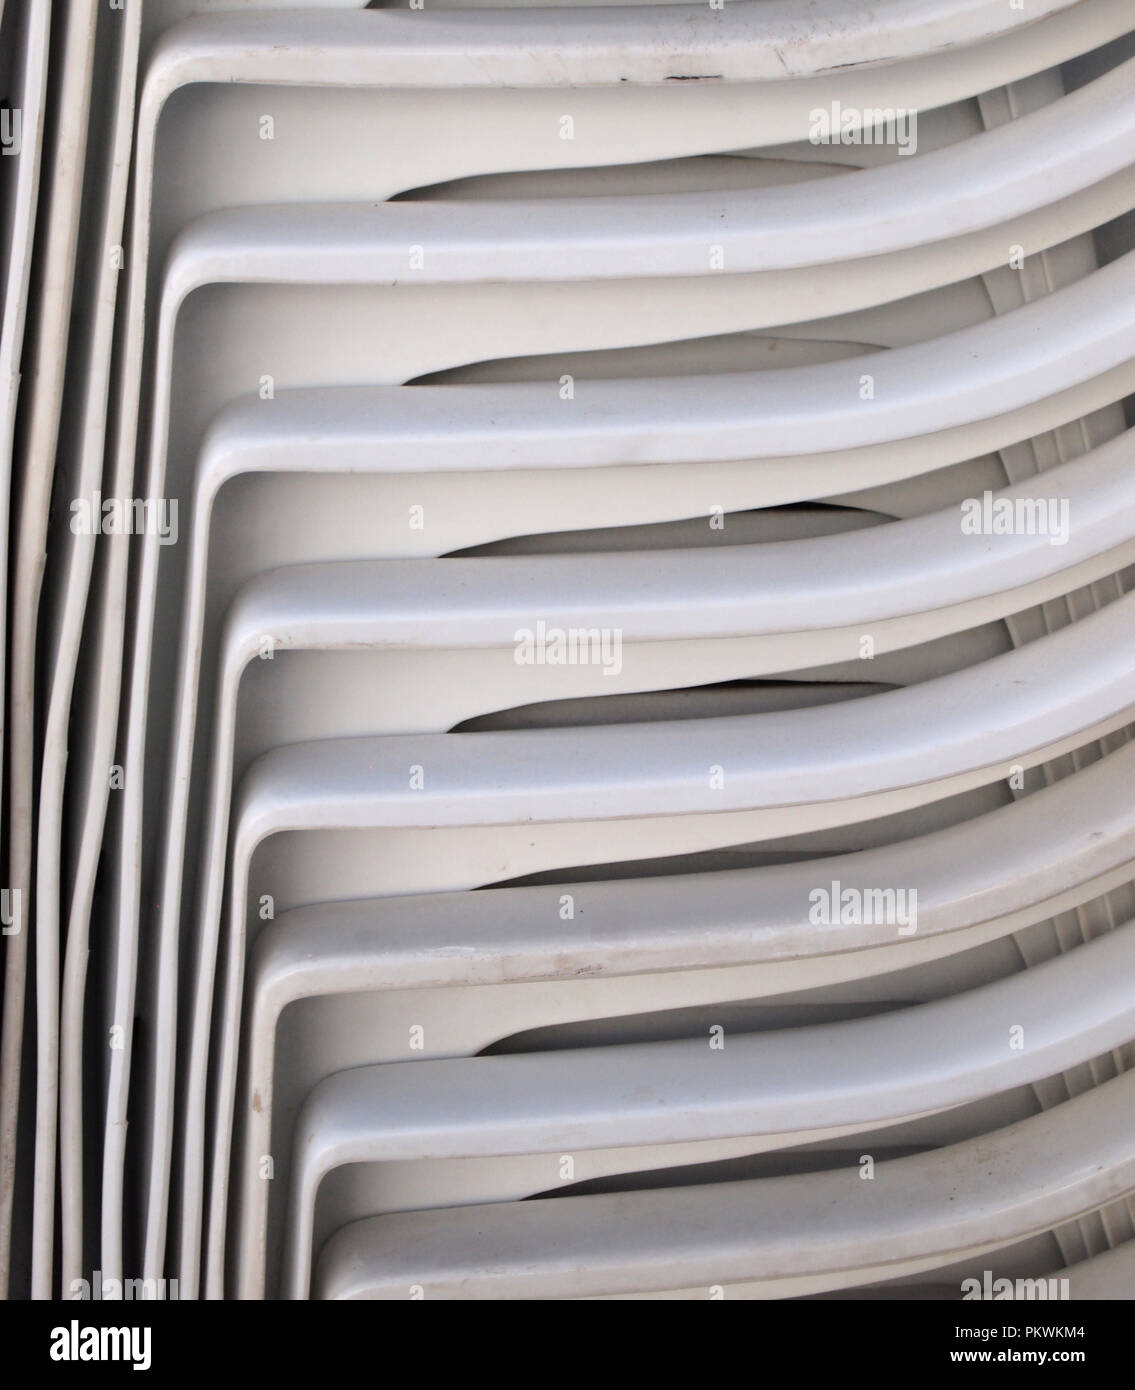 White plastic chairs stacked, showing interesting pattern Stock Photo